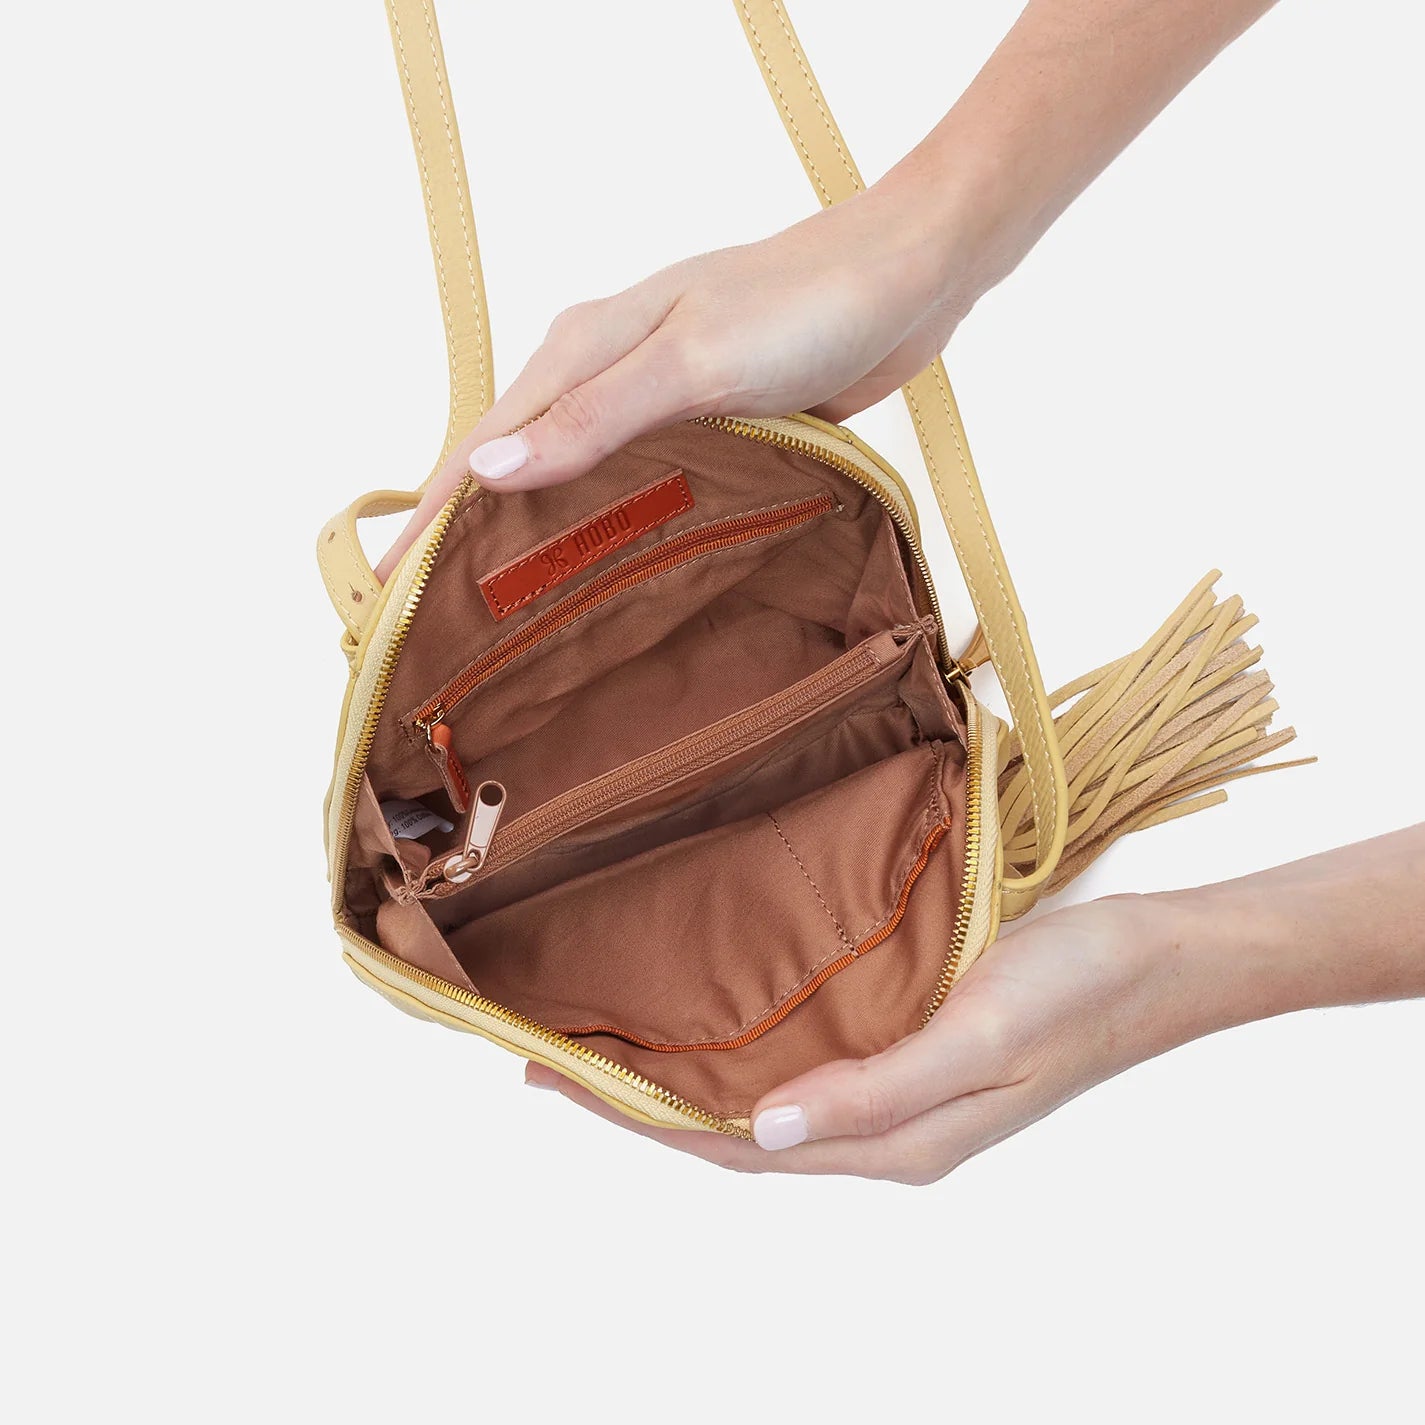 hands holding open flax Nash Crossbody showing interior.